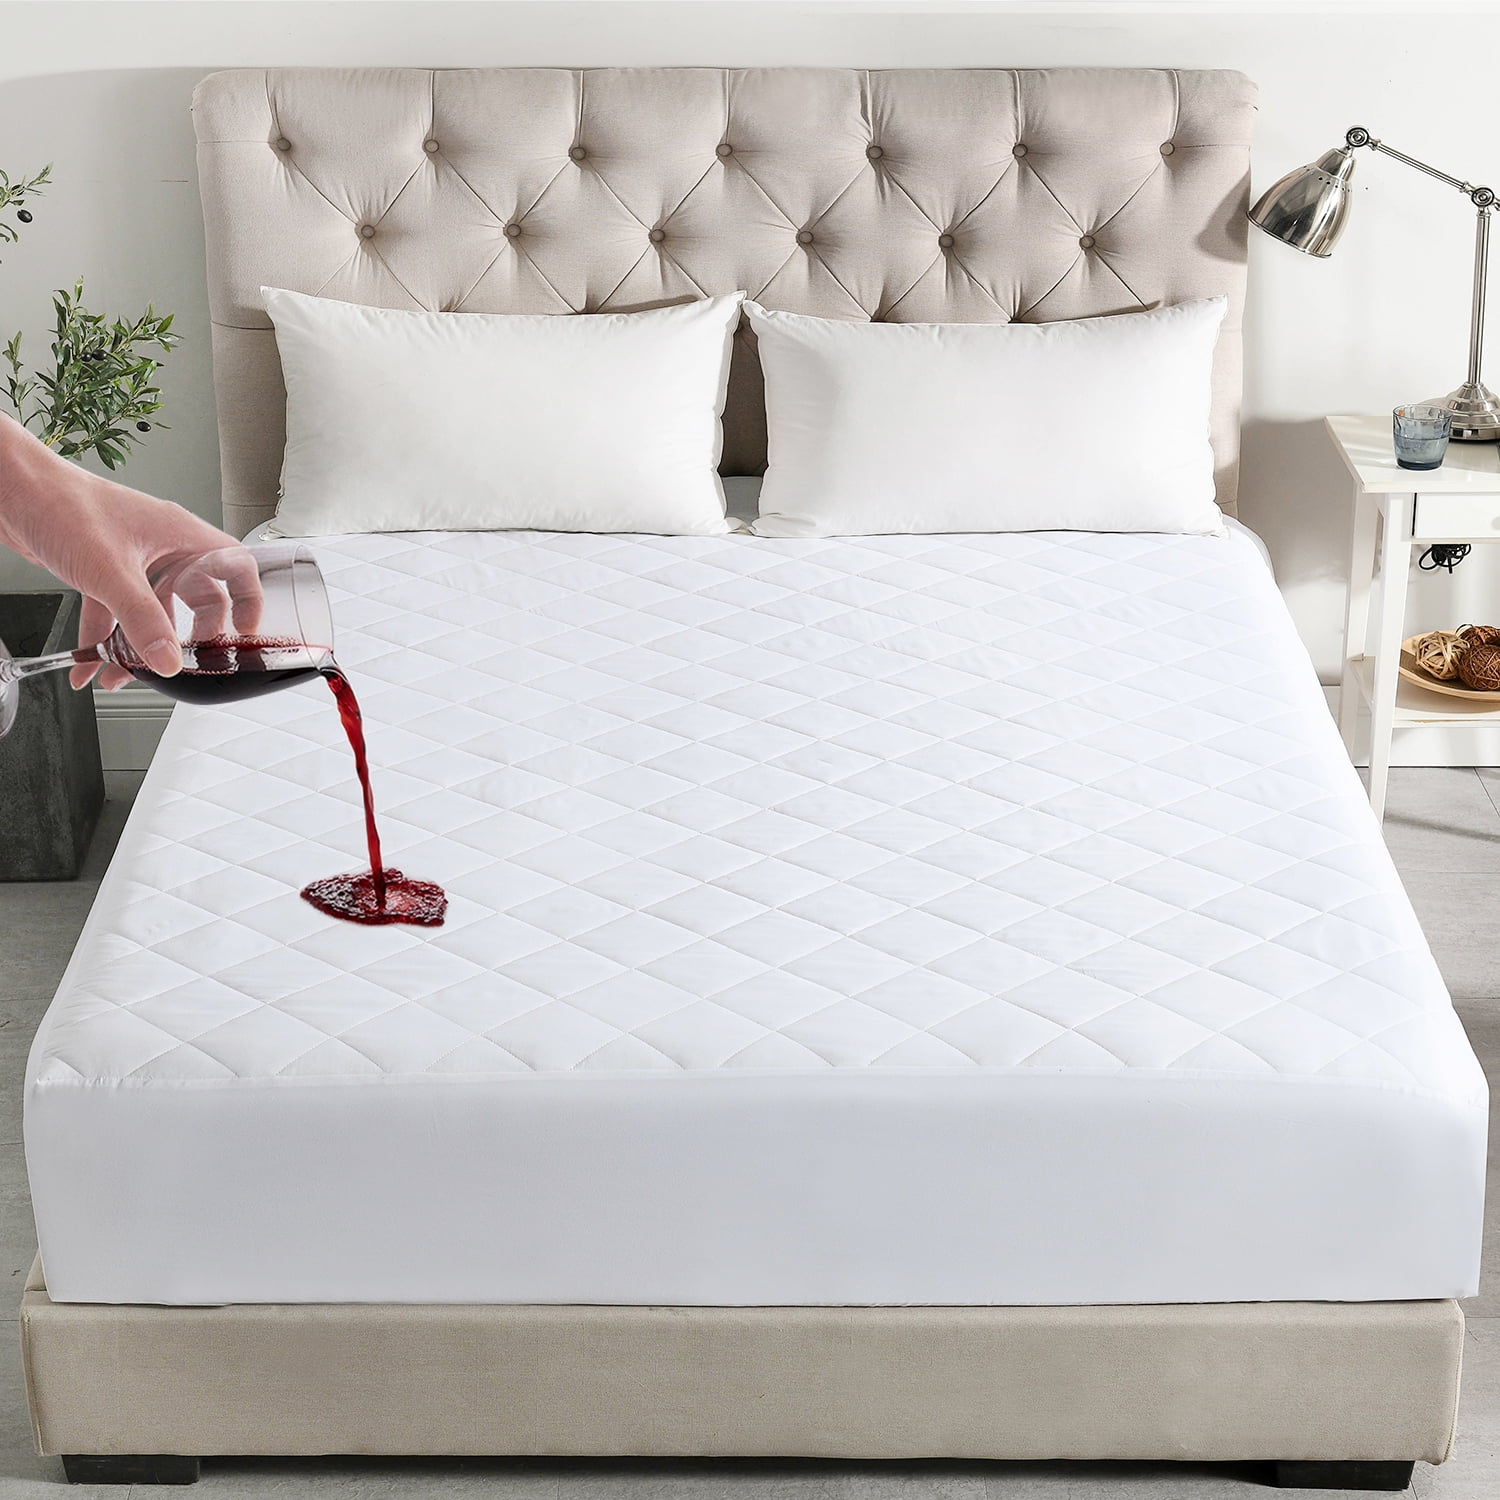 Mattress Pad Cover Topper Protector Quilted Fitted King Queen Full Twin Size Top 